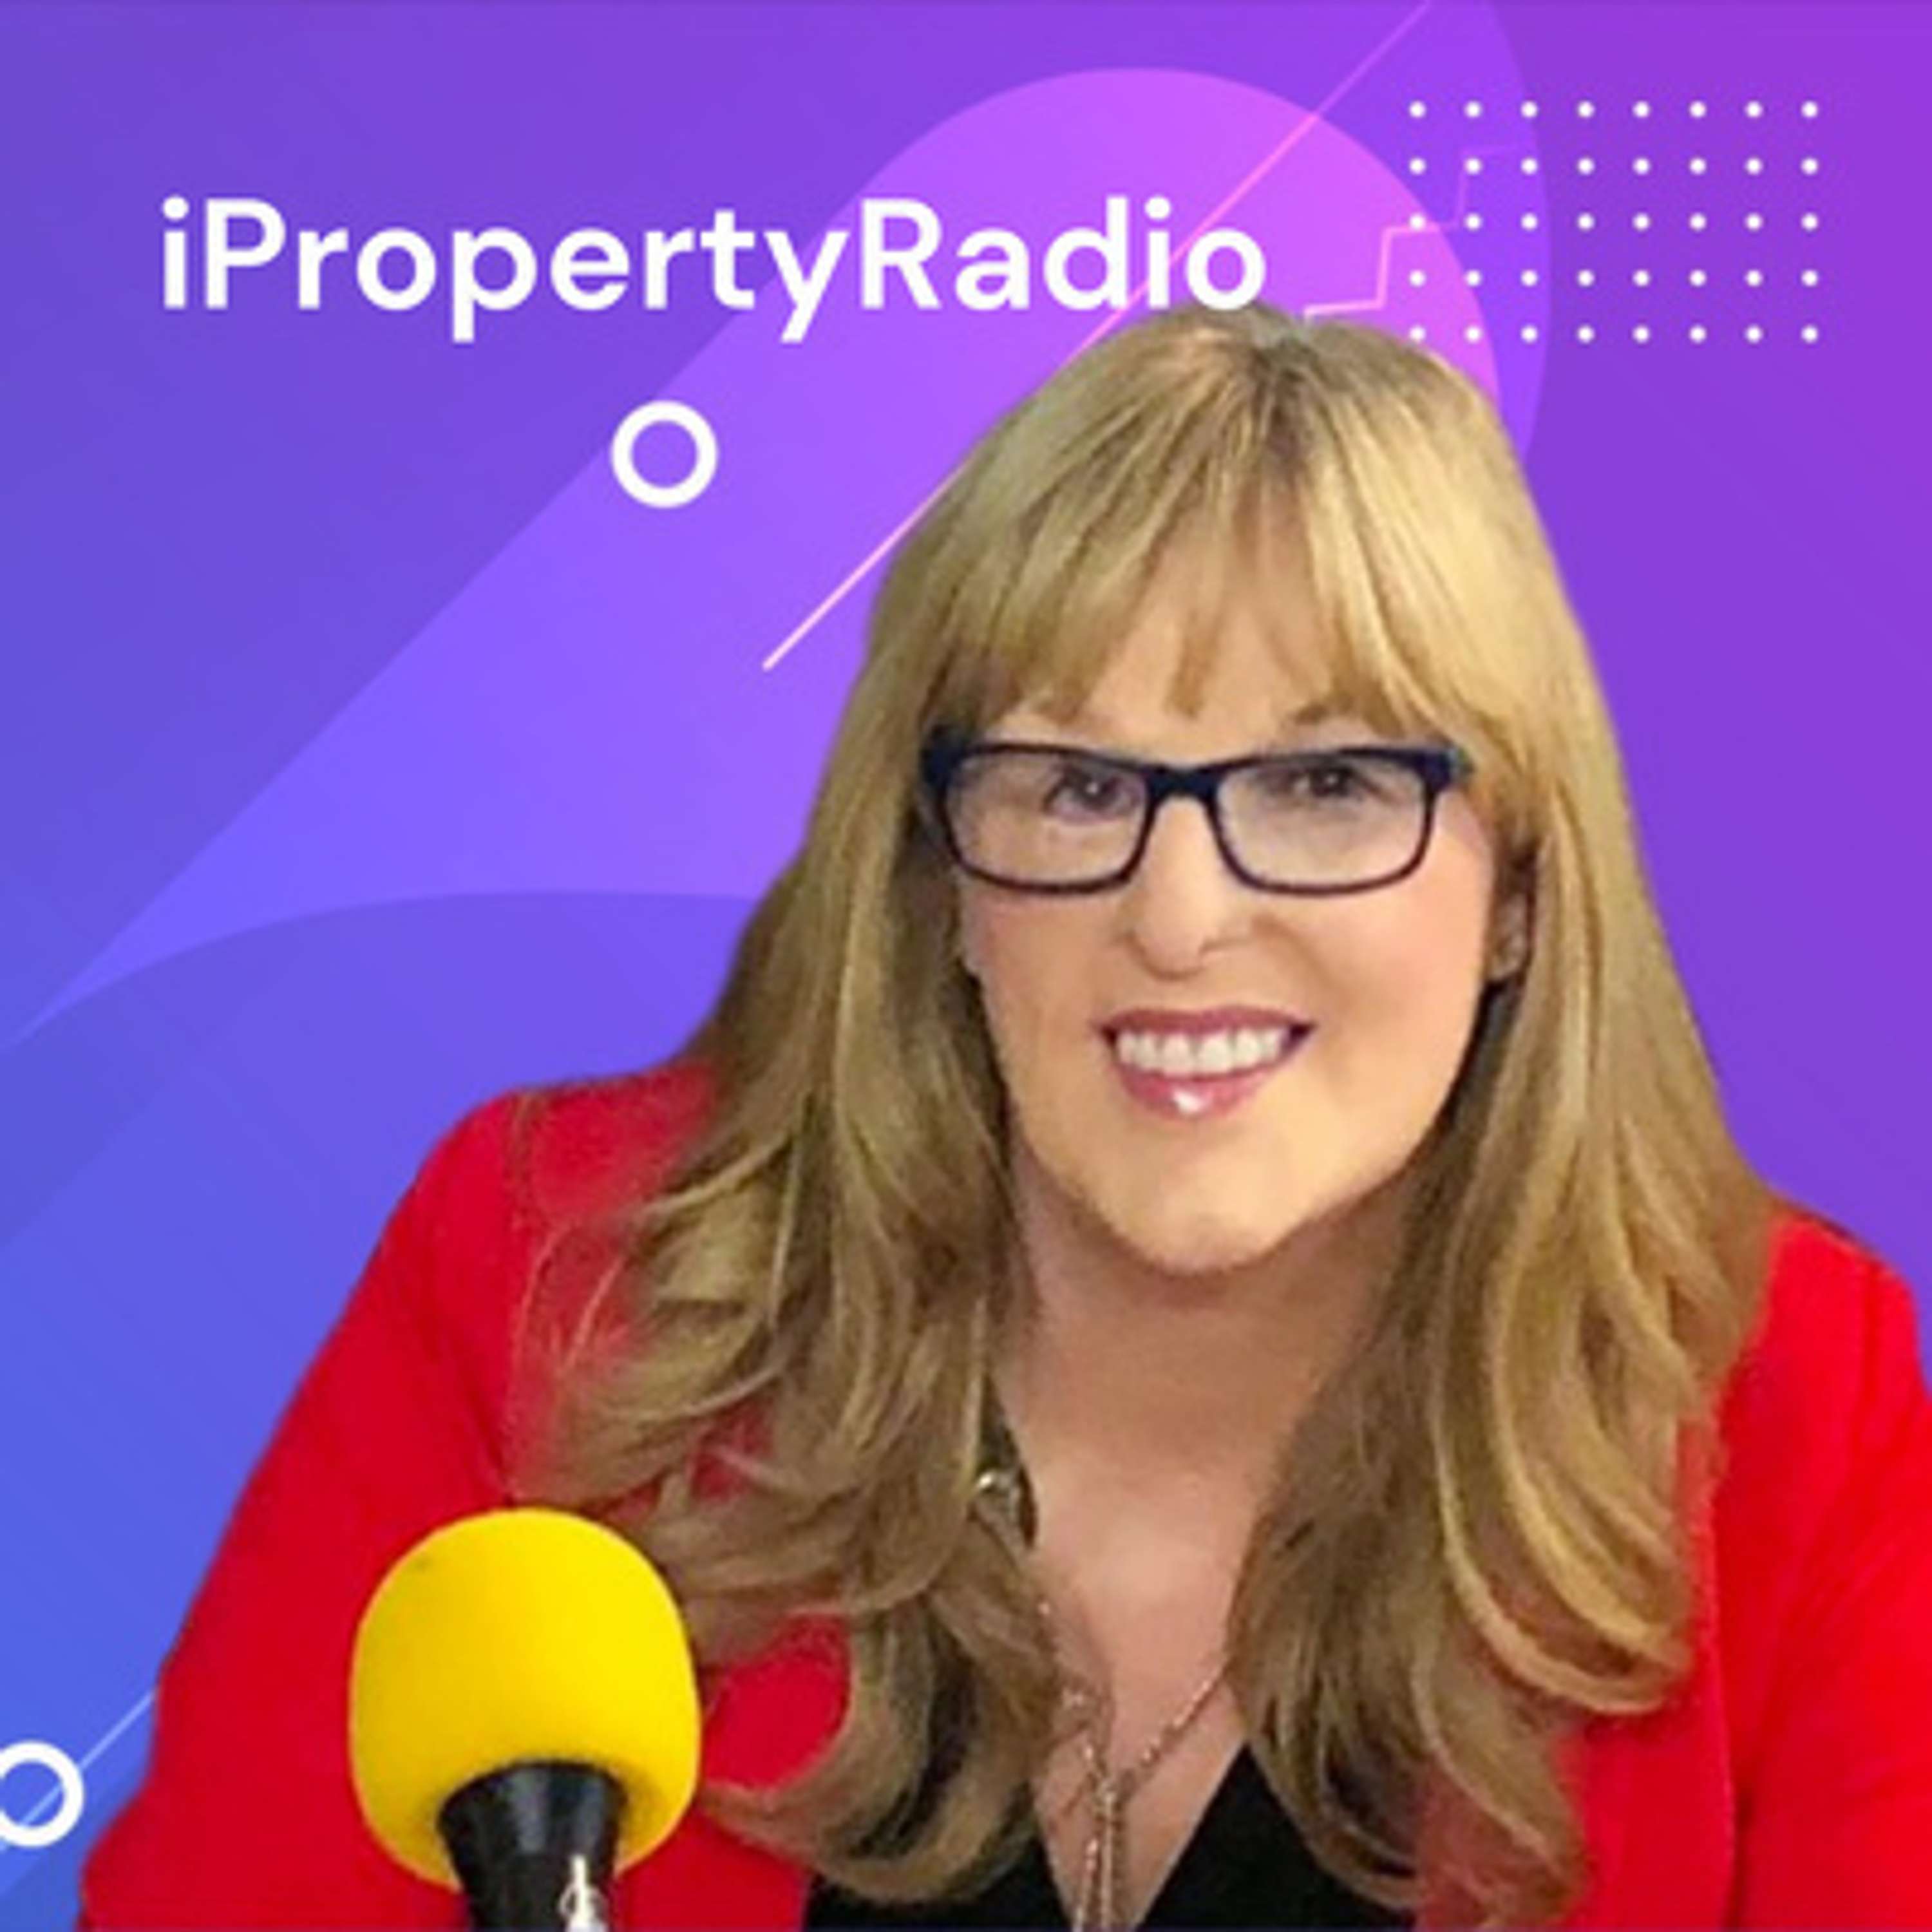 Ep.10 iPropertyRadio: Property Matters, March 26th 2019